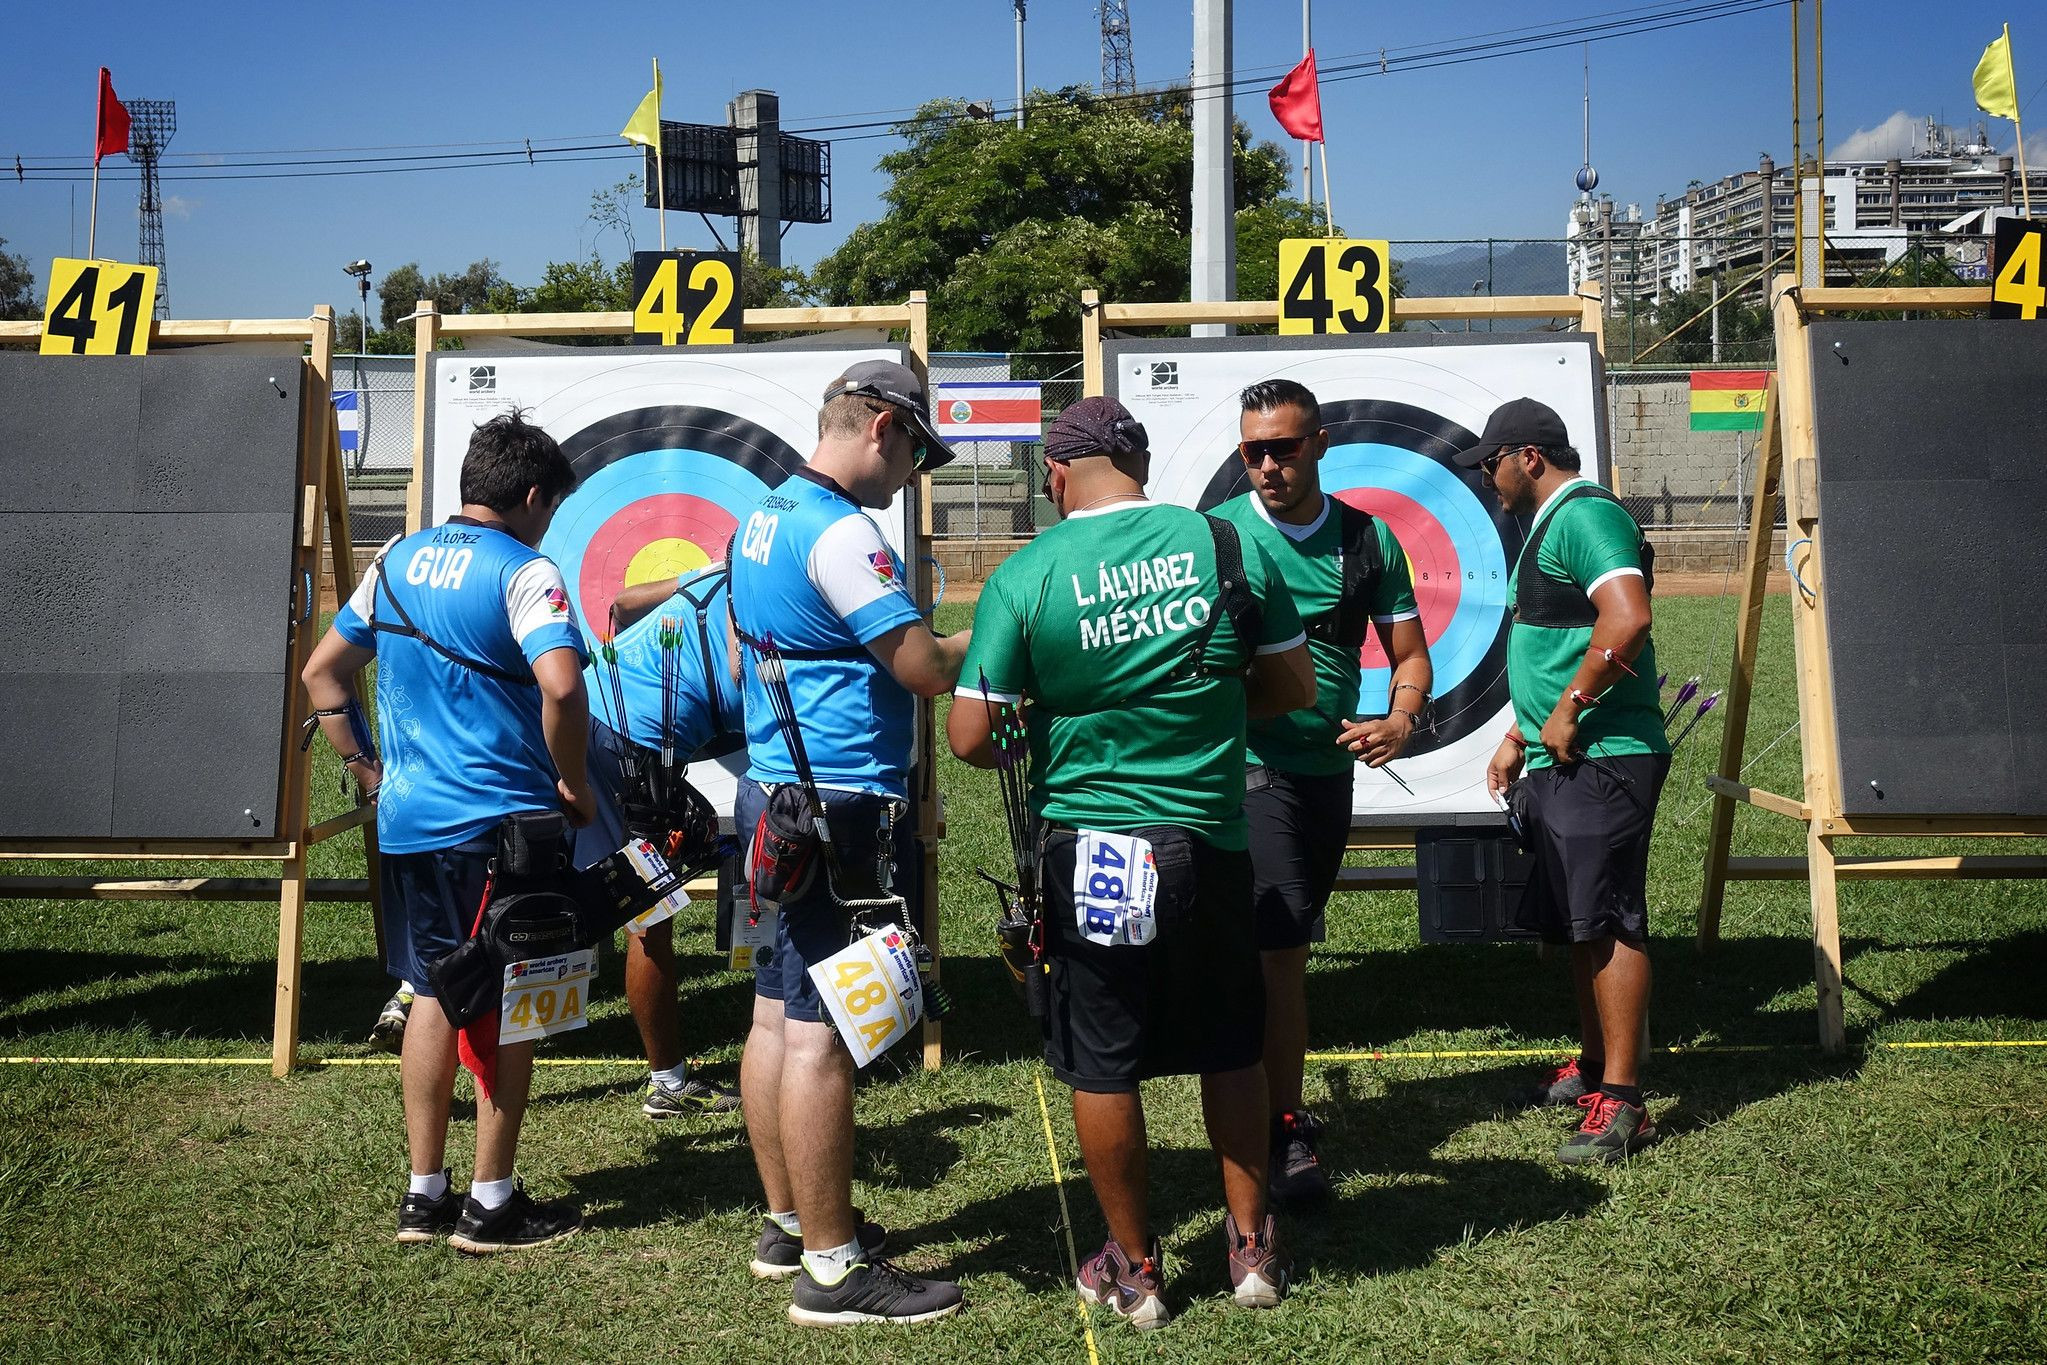 Team action took centre stage in Colombia on day two ©World Archery